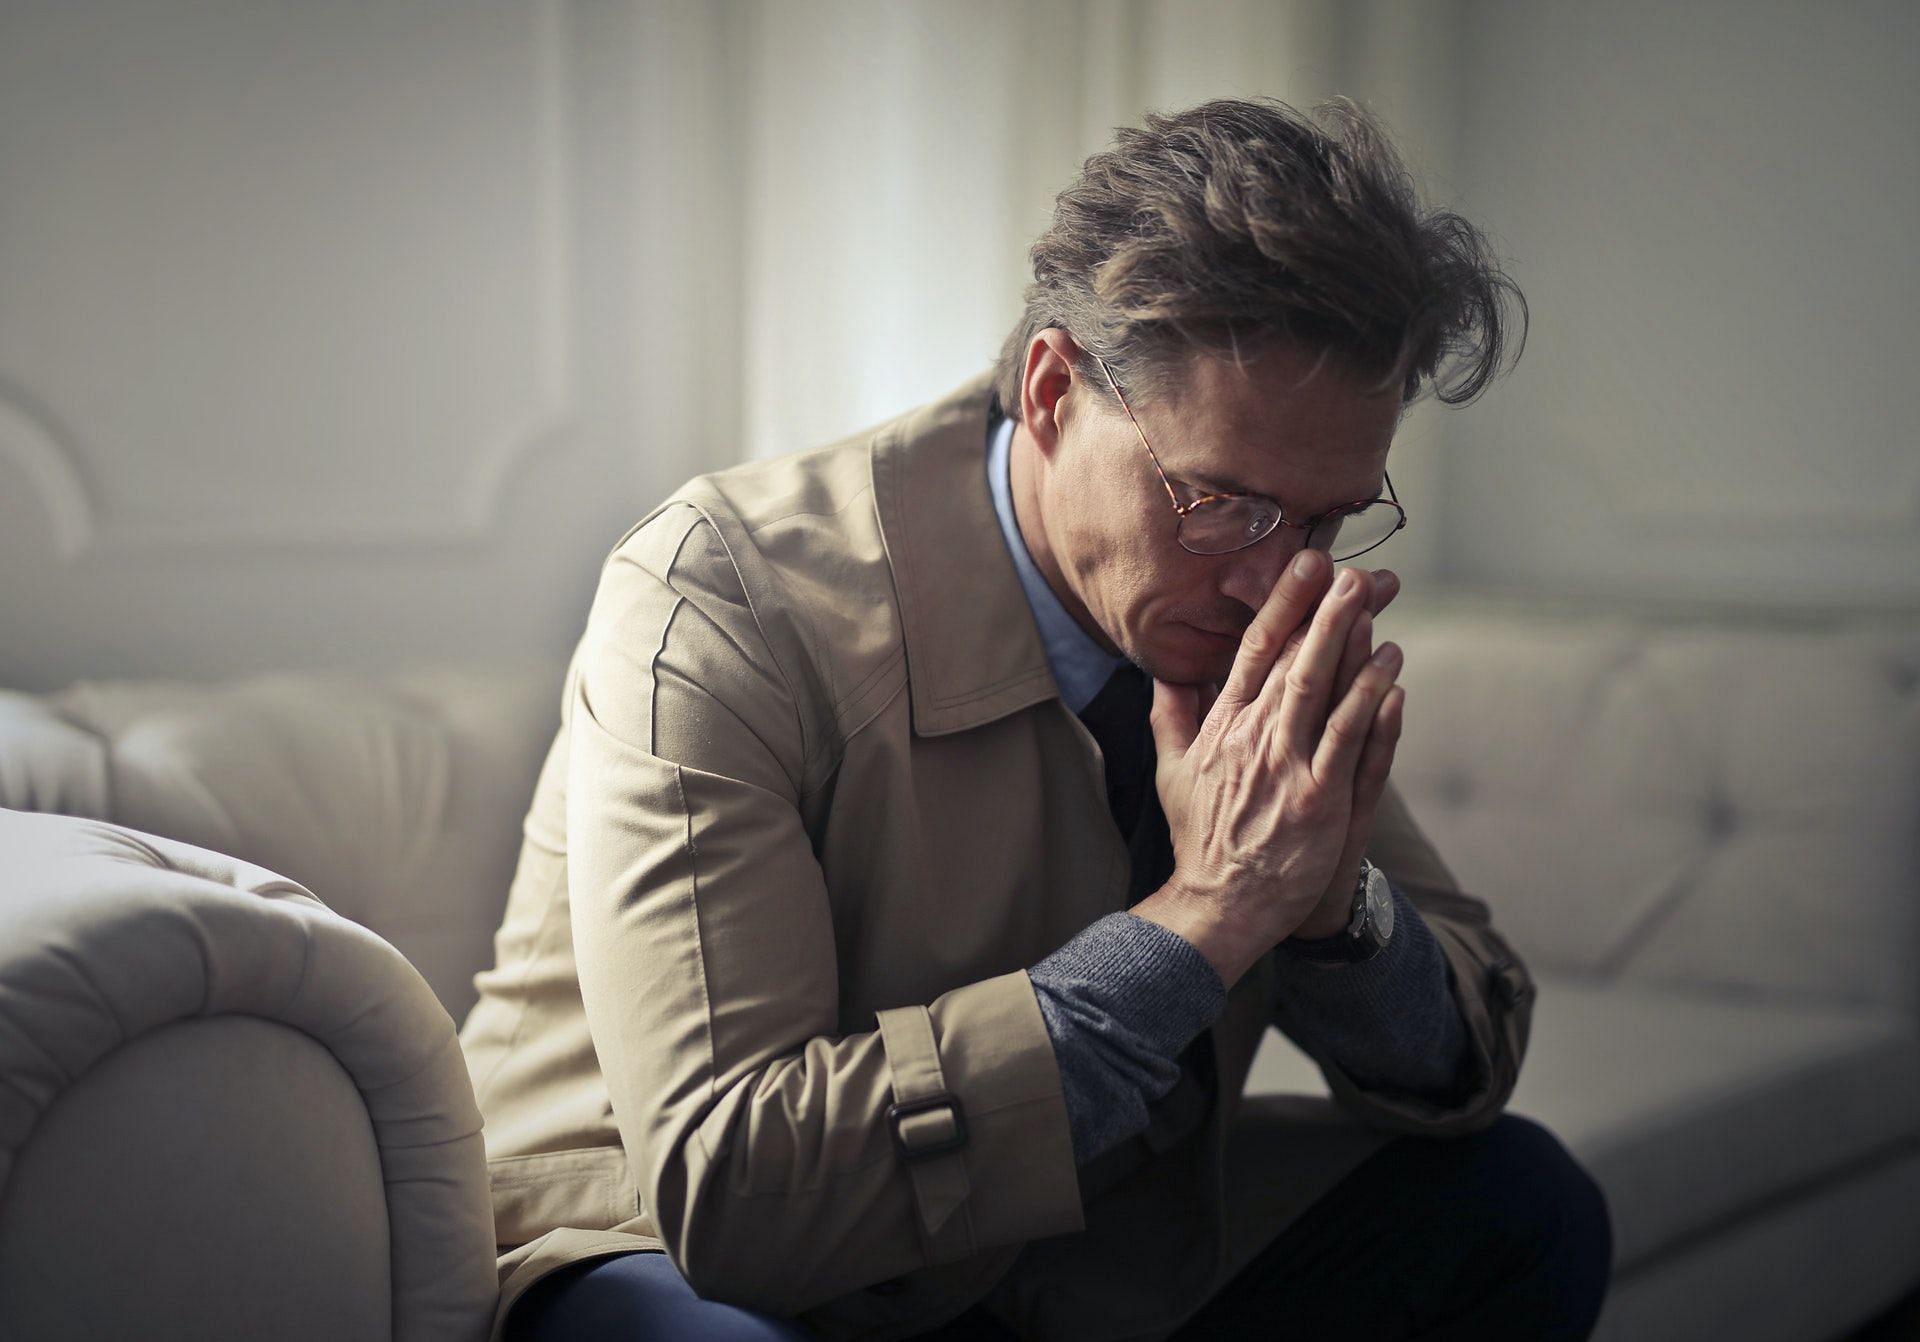 Prostate problems can negatively affect your physical and mental well-being. (Photo by Andrea Piacquadio via pexels)